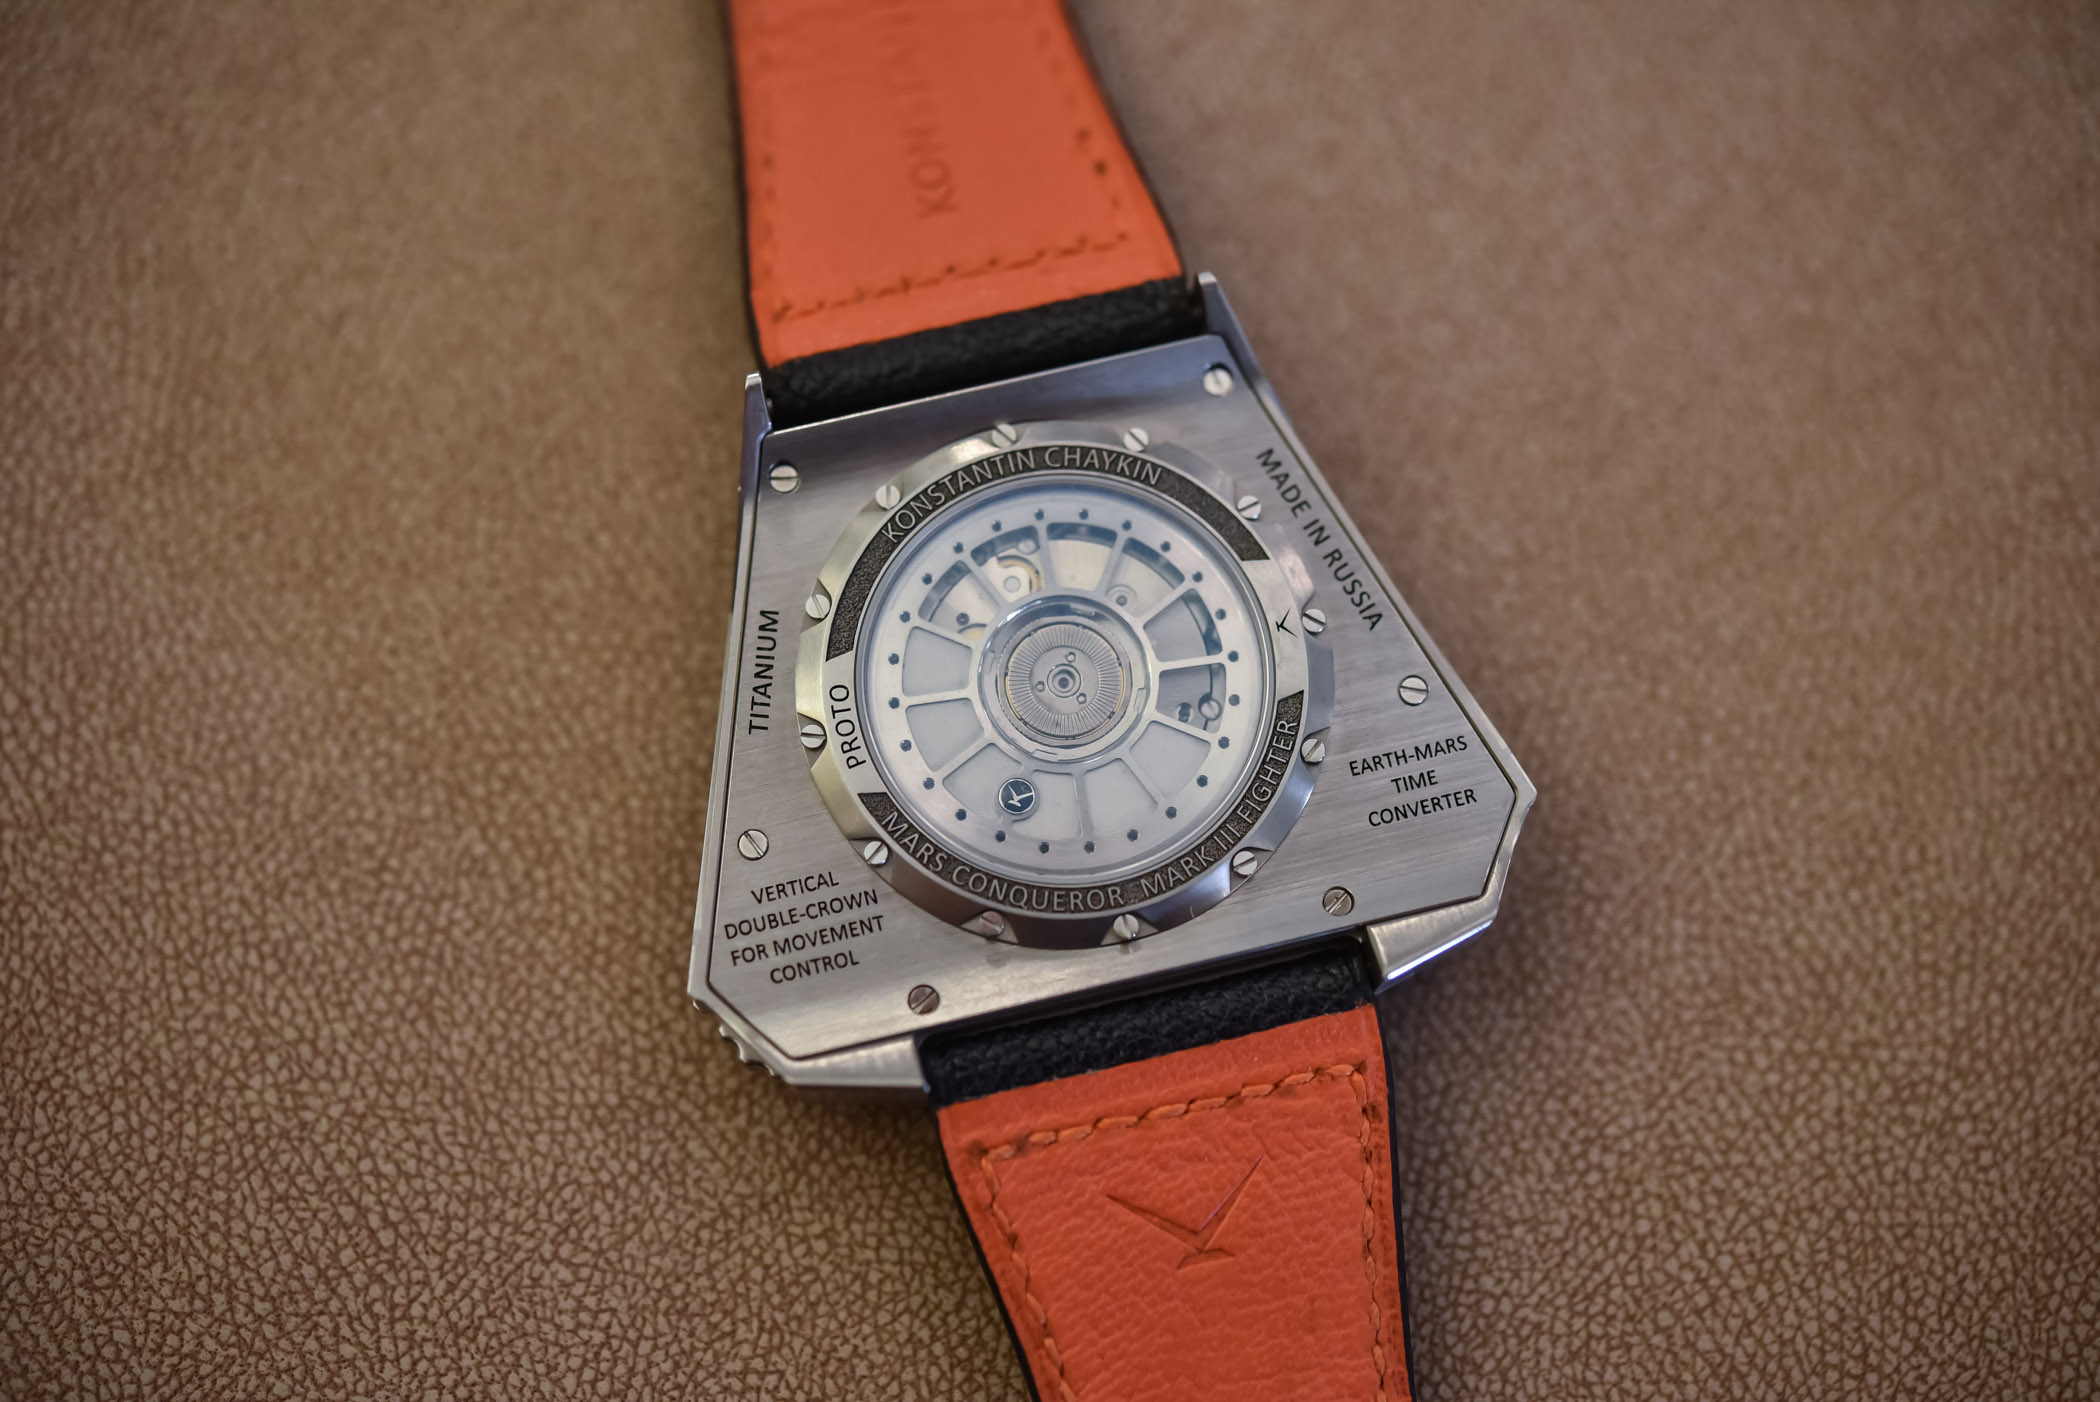 Review Konstantin Chaykin Mars Conqueror MK3, The Watch Made For The Exploration of Mars